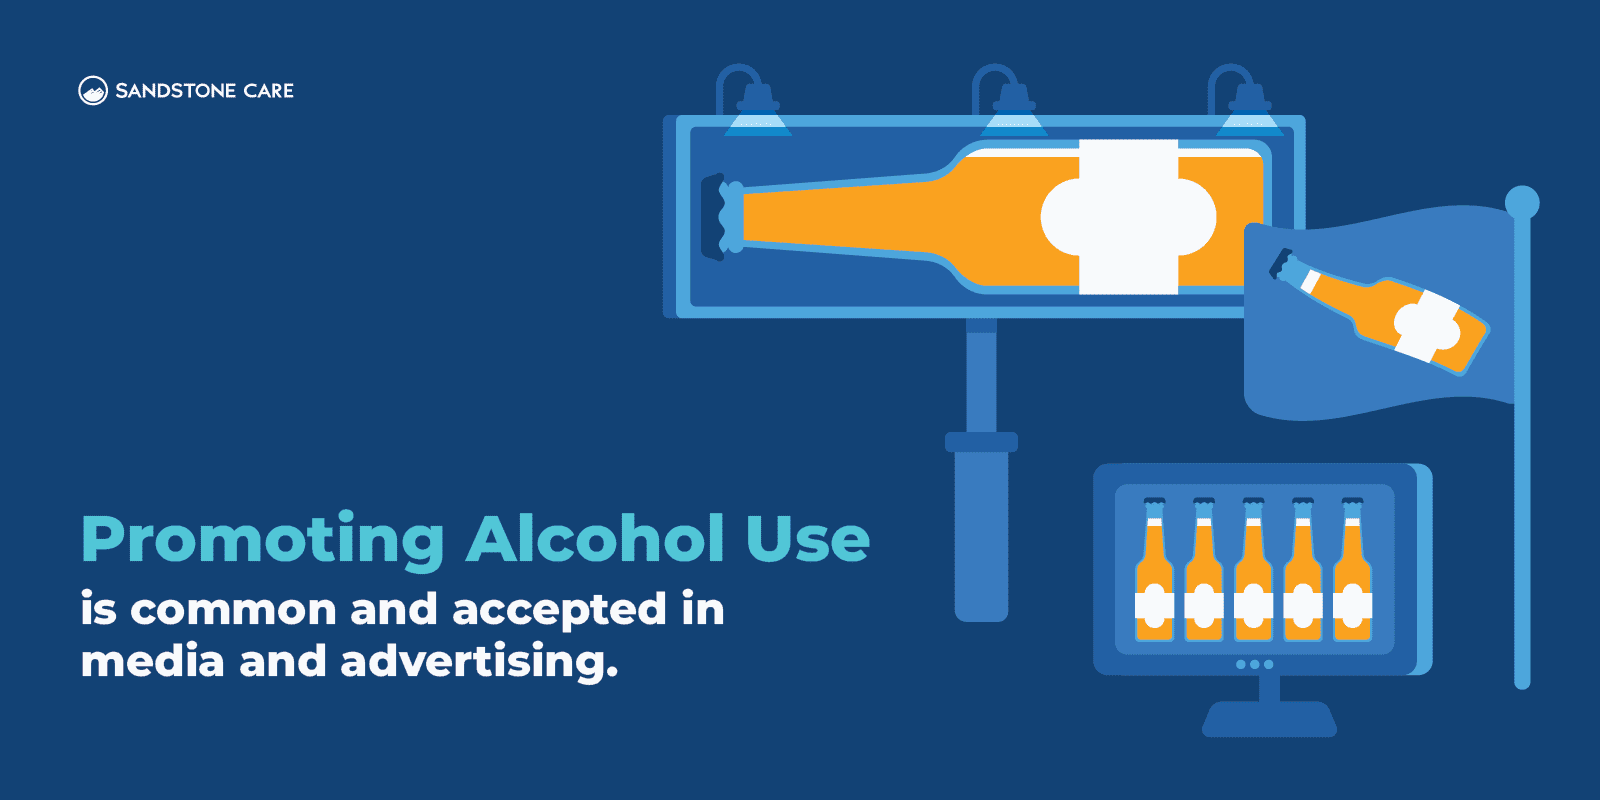 Pro-Alcohol Use in Media Inline Image